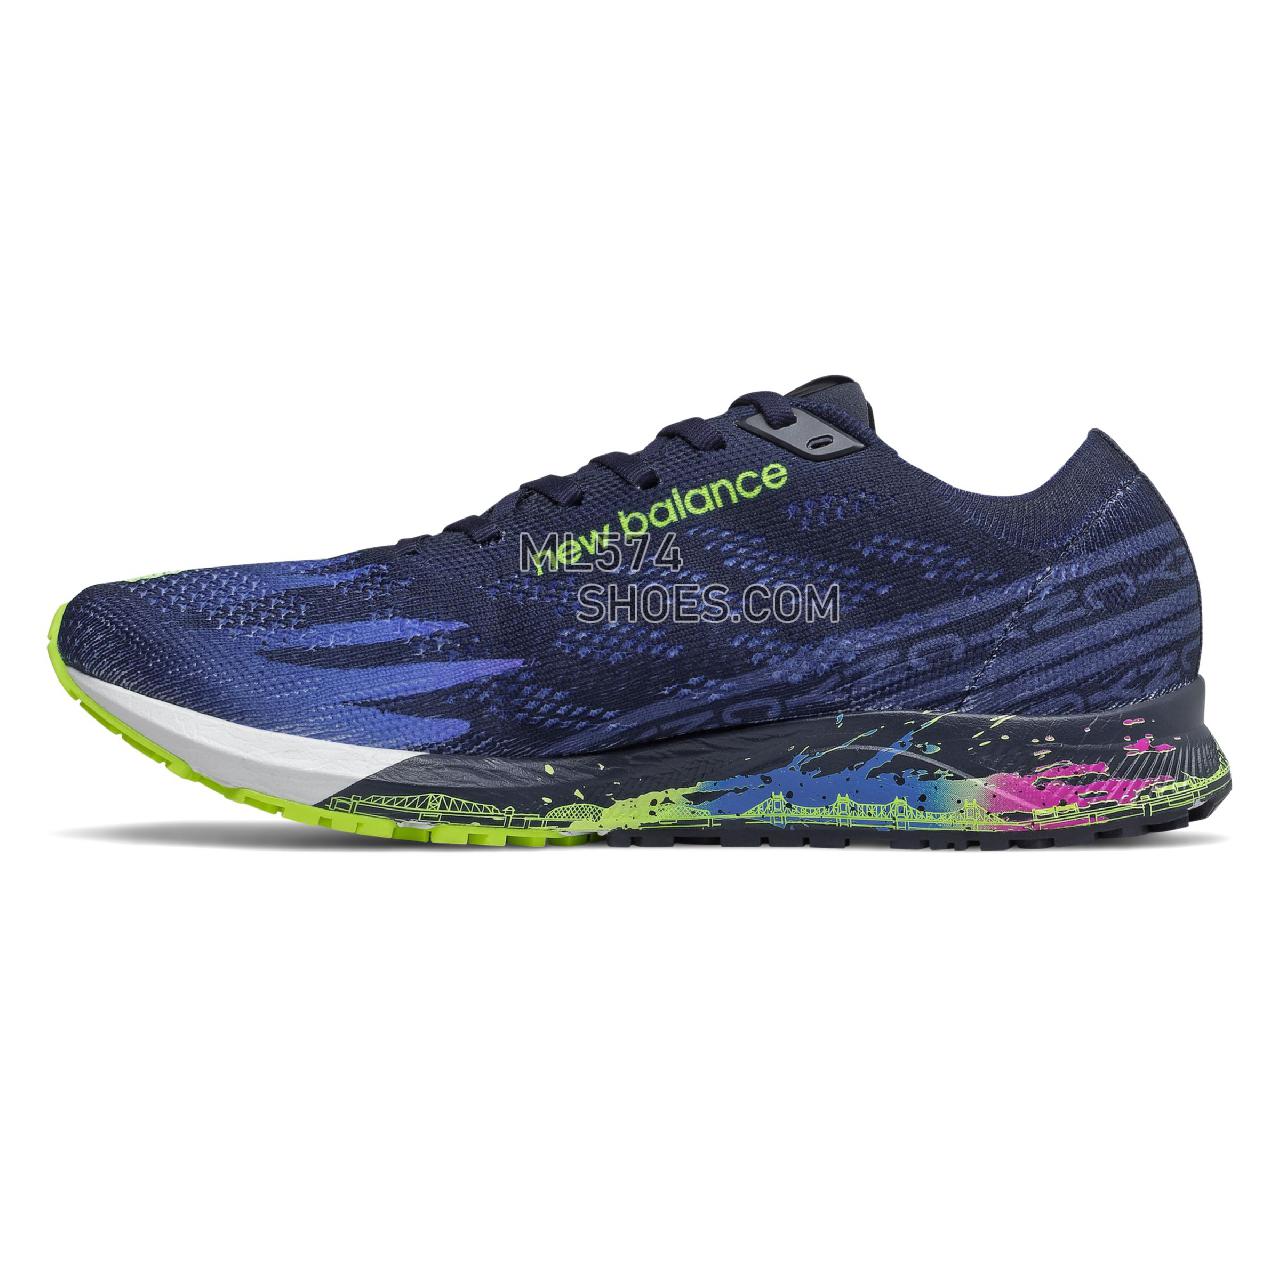 New Balance 1500v6 NYC Marathon - Women's Track Spikes And Cross Country - Eclipse with Hi Lite and Lapis Blue - W1500NY6